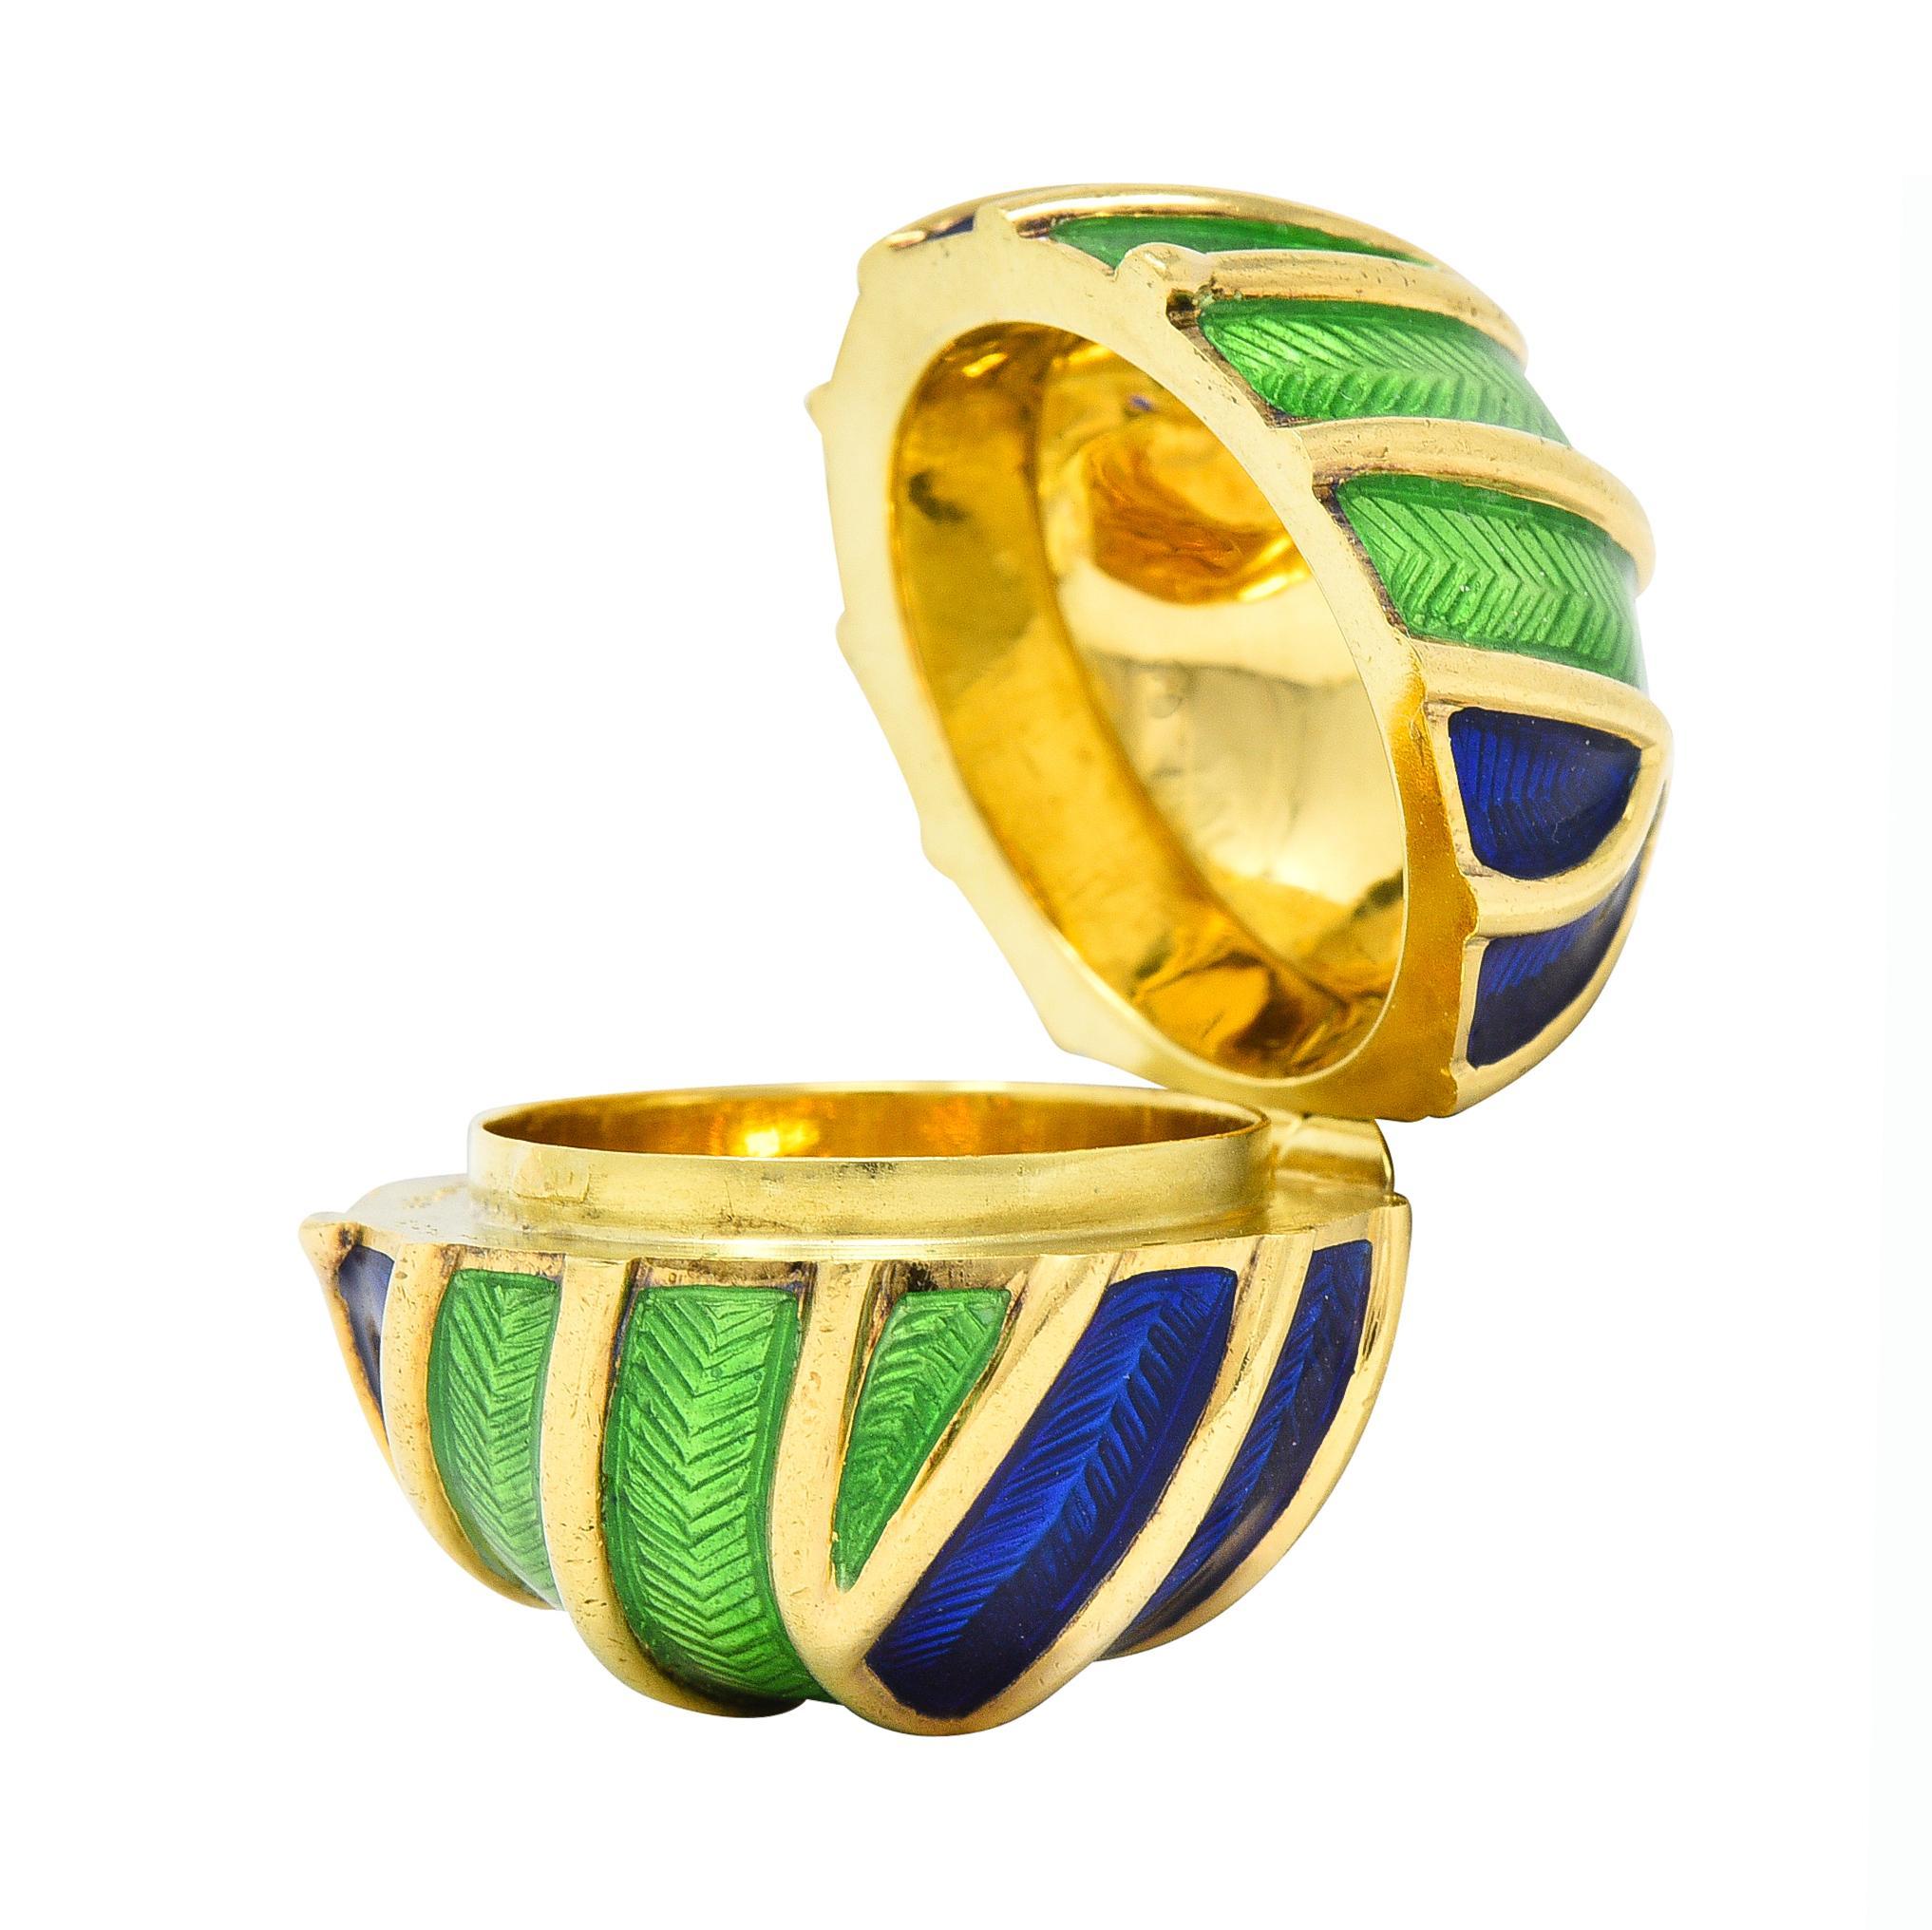 Designed as a sphere form with raised gold ridges featuring recessed segments of enamel
Basse-taille and glossed over engraved linear chevron motif 
Transparent medium blue and green - minimal loss
Sphere opens on a hinge to reveal domed